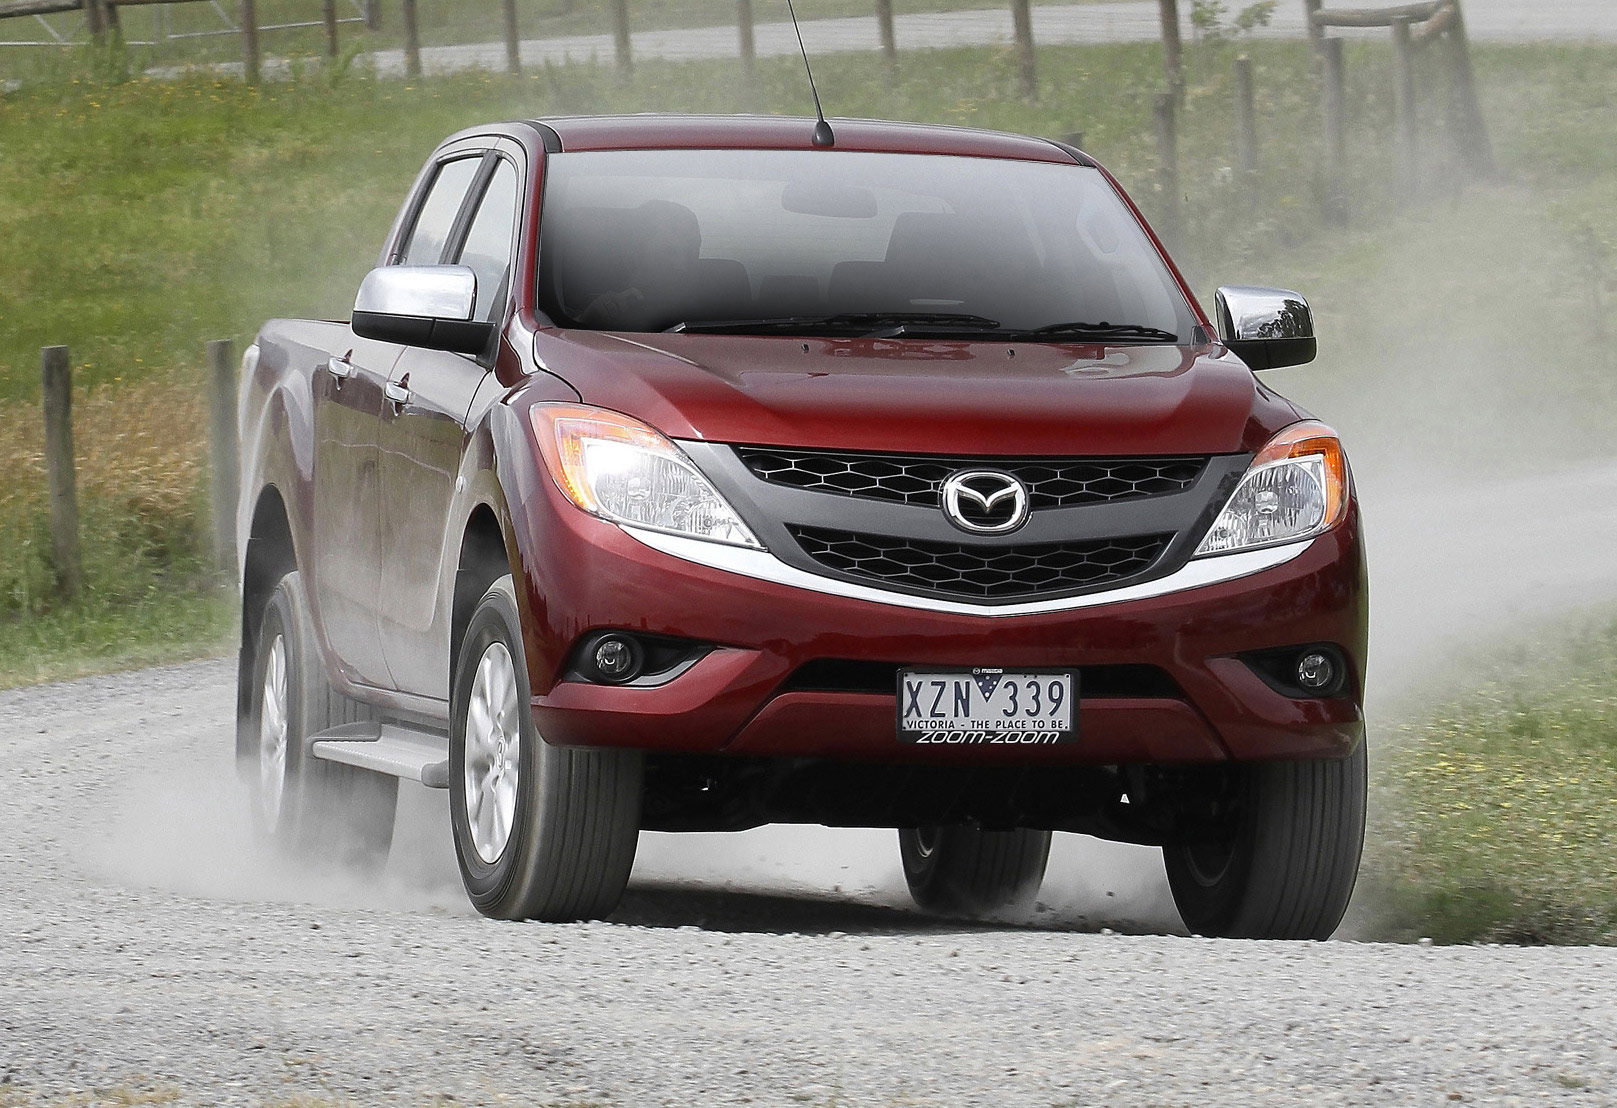 Mazda BT-50. View Download Wallpaper. 1617x1108. Comments